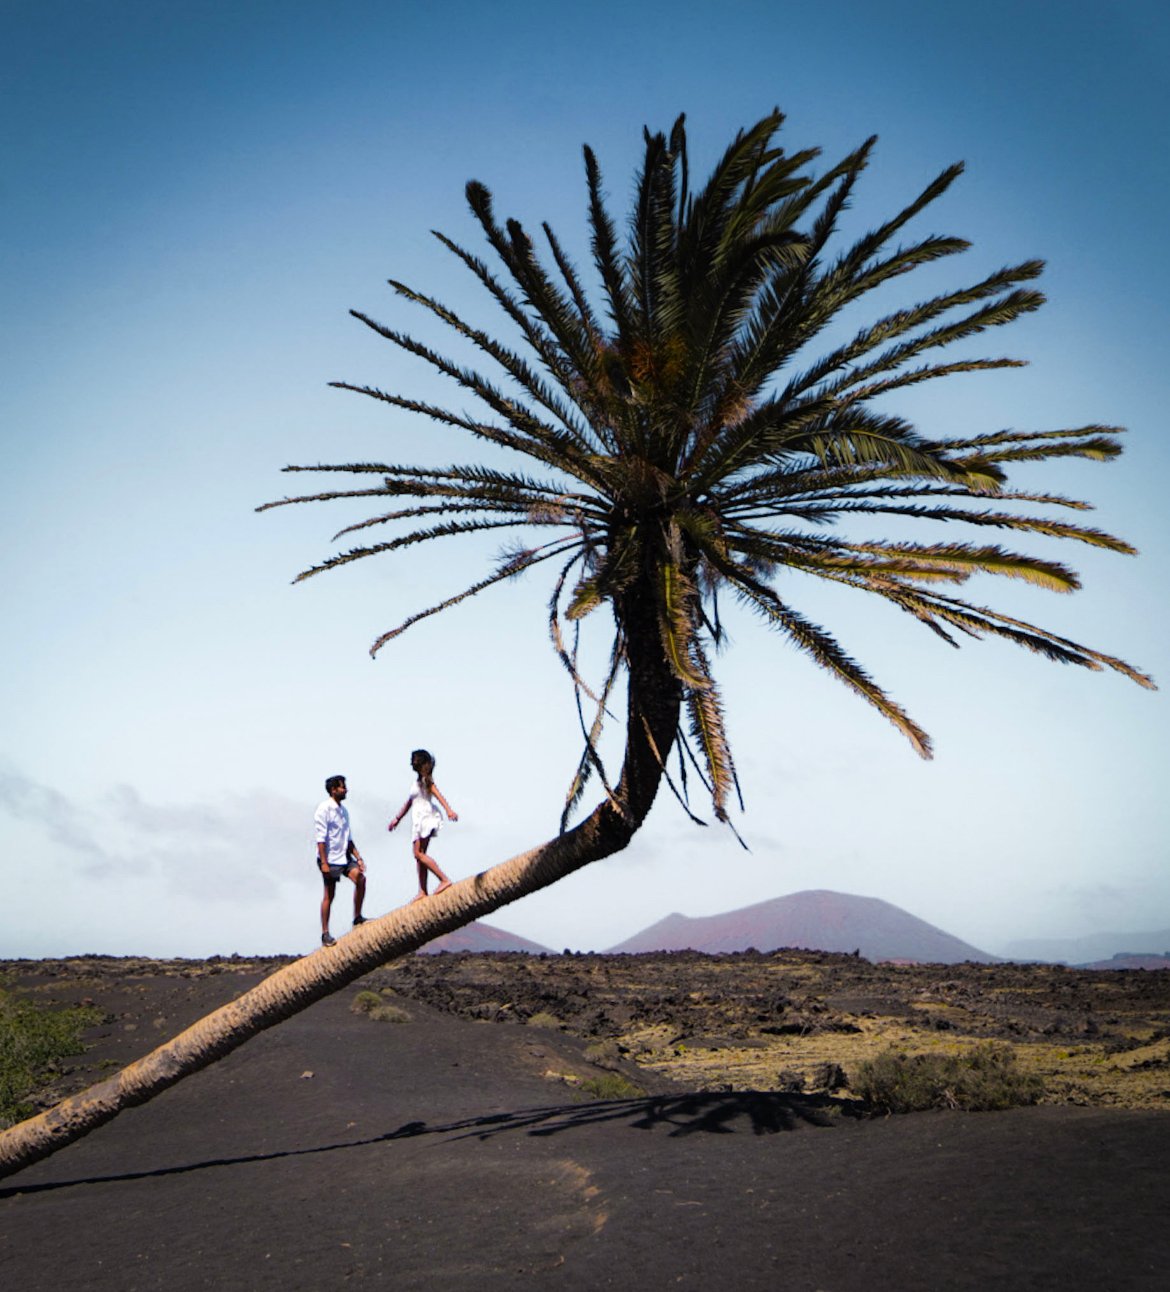 Palmera inclinada, things to see in Lanzarote in the Canary Islands